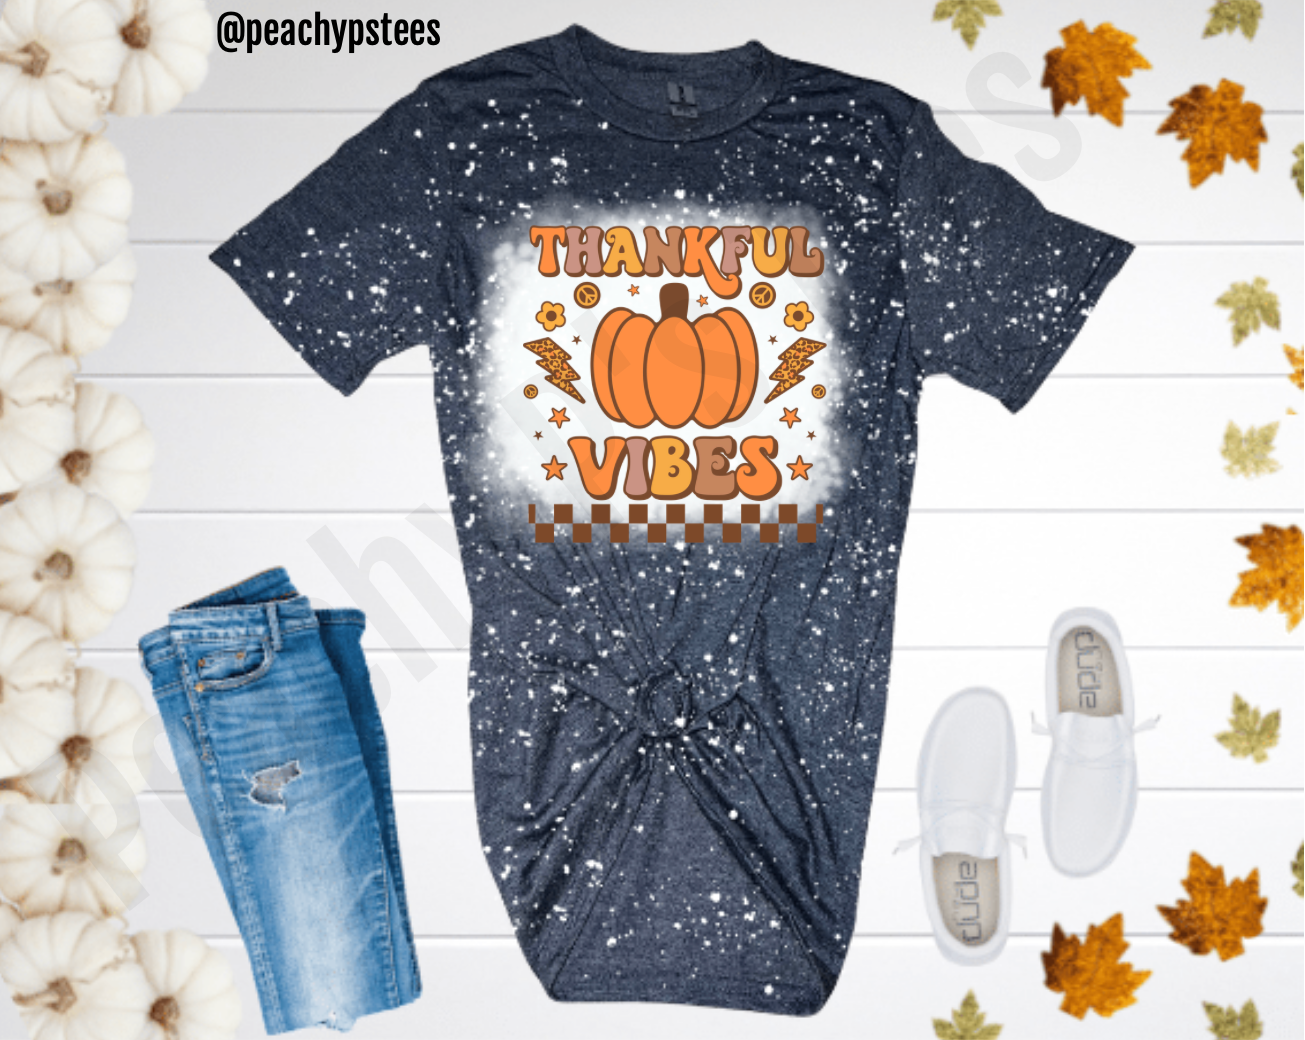 Thankful Vibes Bleached T-Shirt